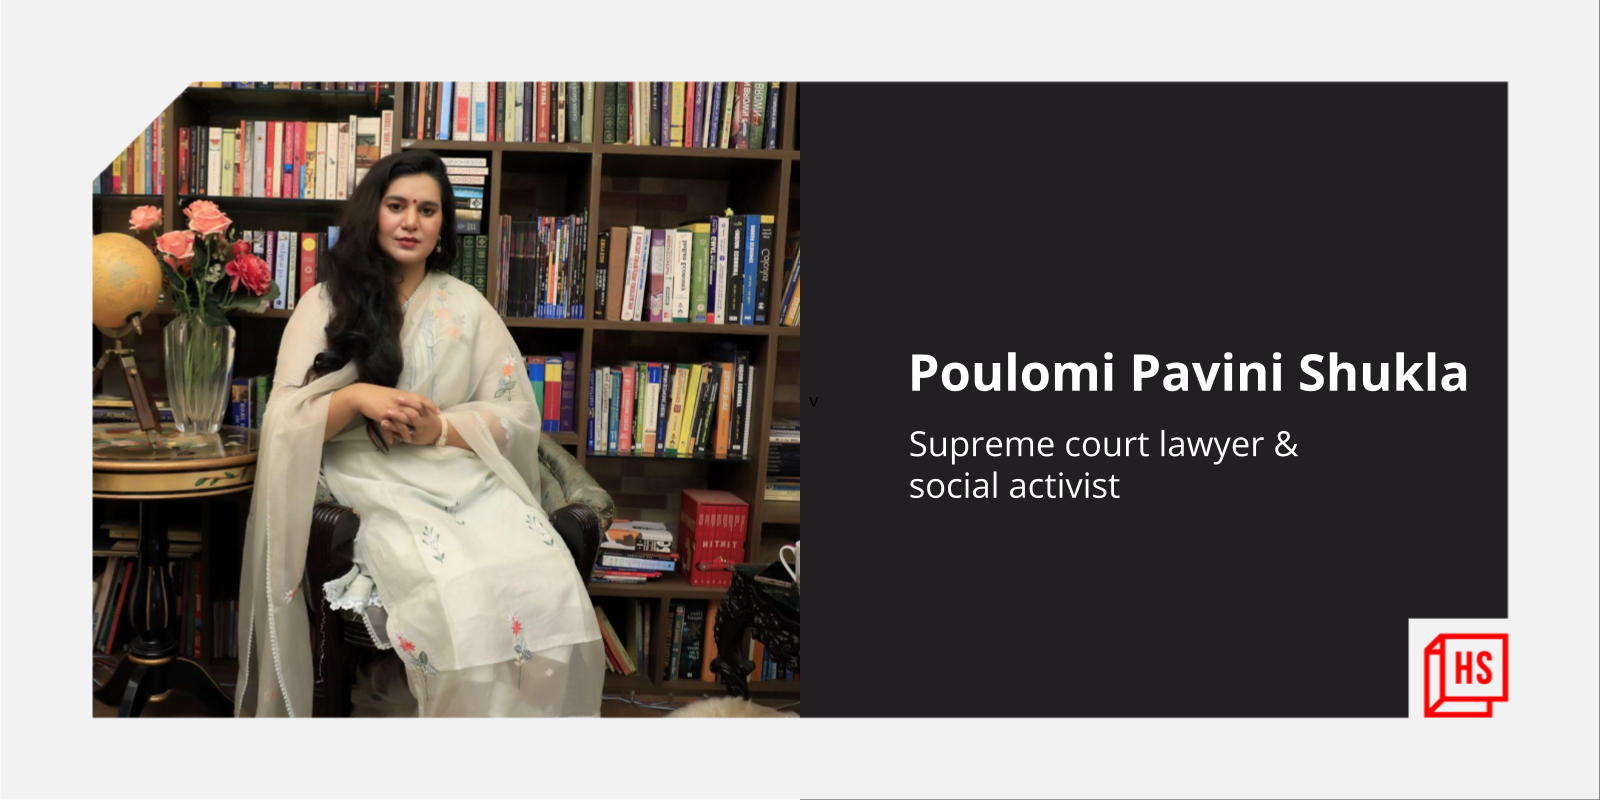 Poulomi Pavini Shukla: Supreme court lawyer, social activist, and the voice for India’s 2.9 Cr orphans
